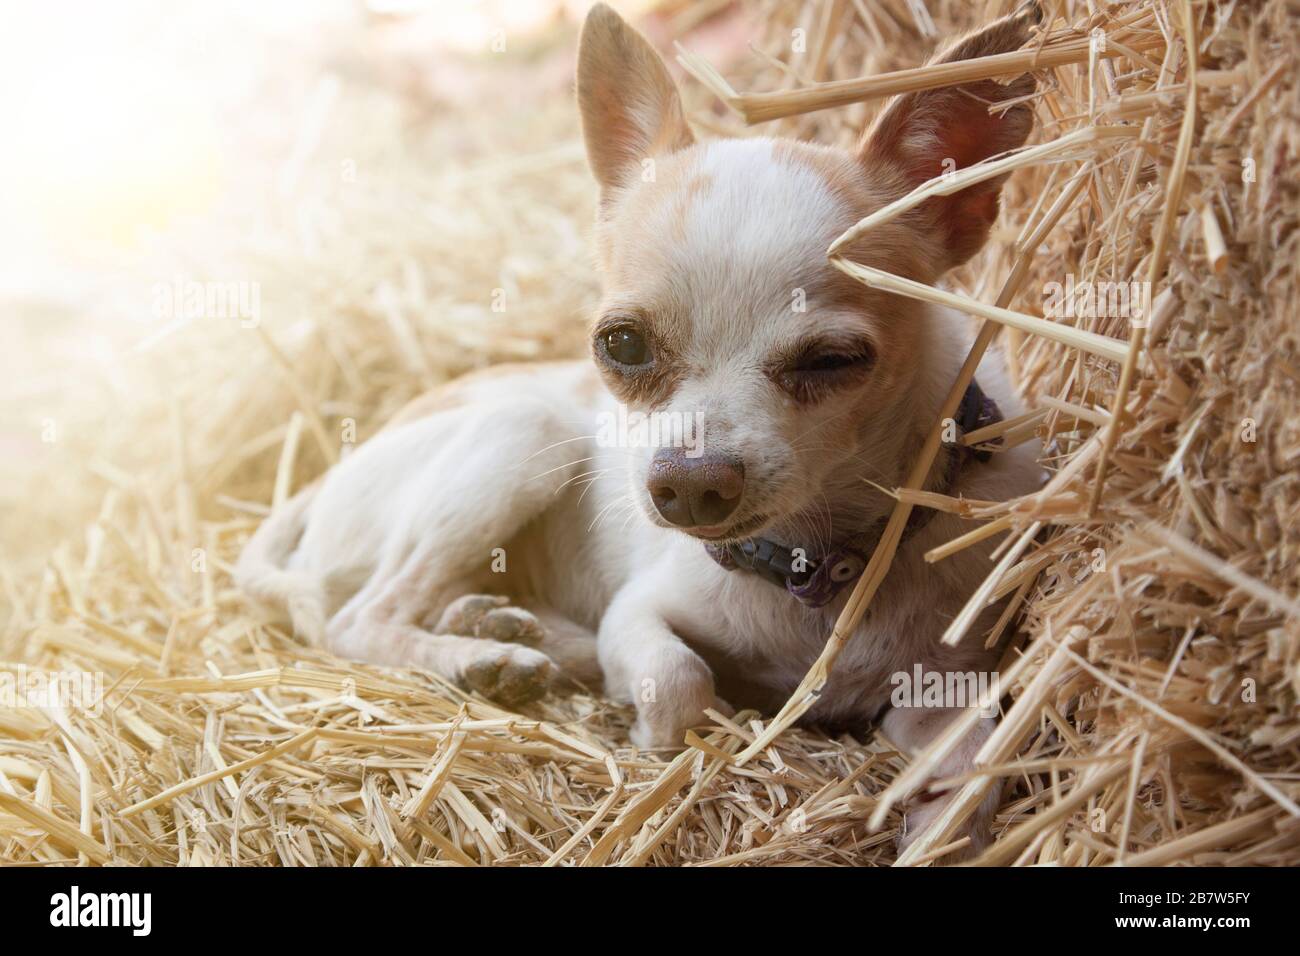 young Chihuahua dog rest on rice straw Stock Photo